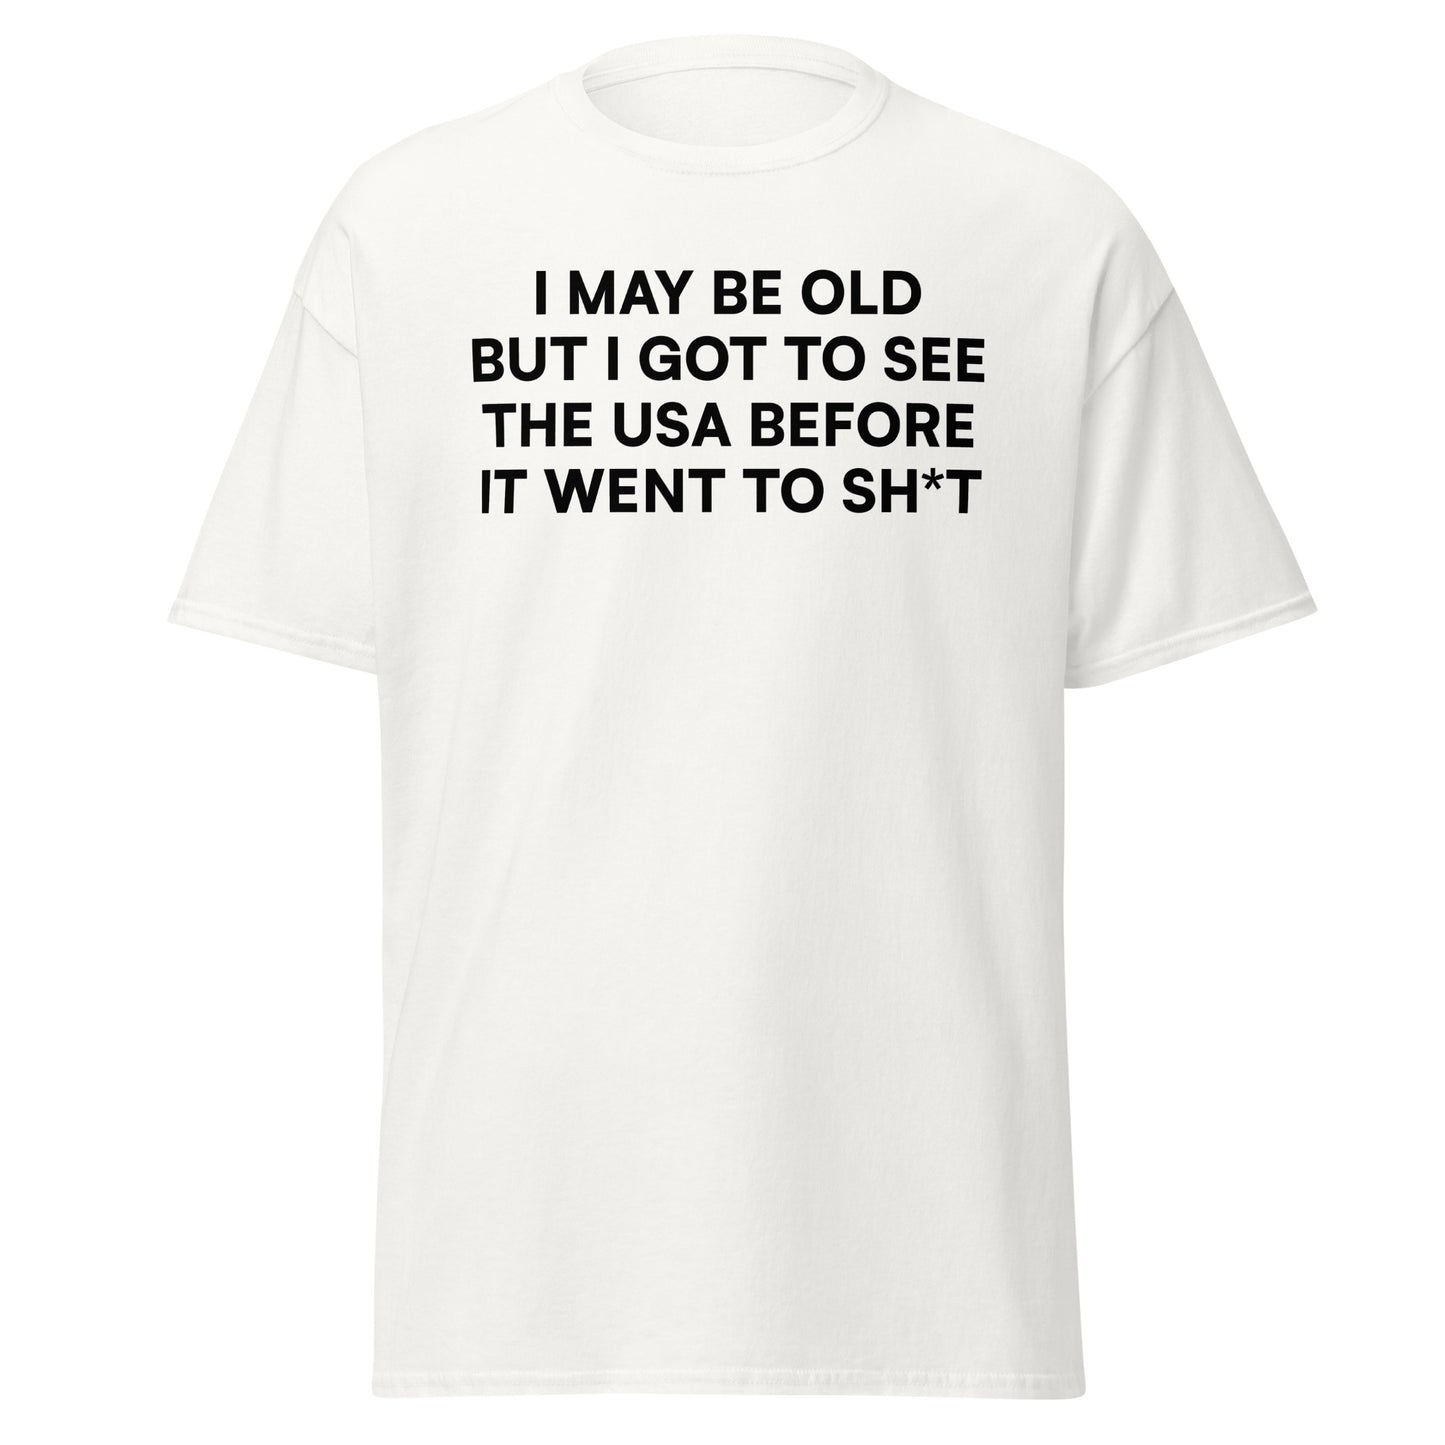 I MAY BE OLD BUT...